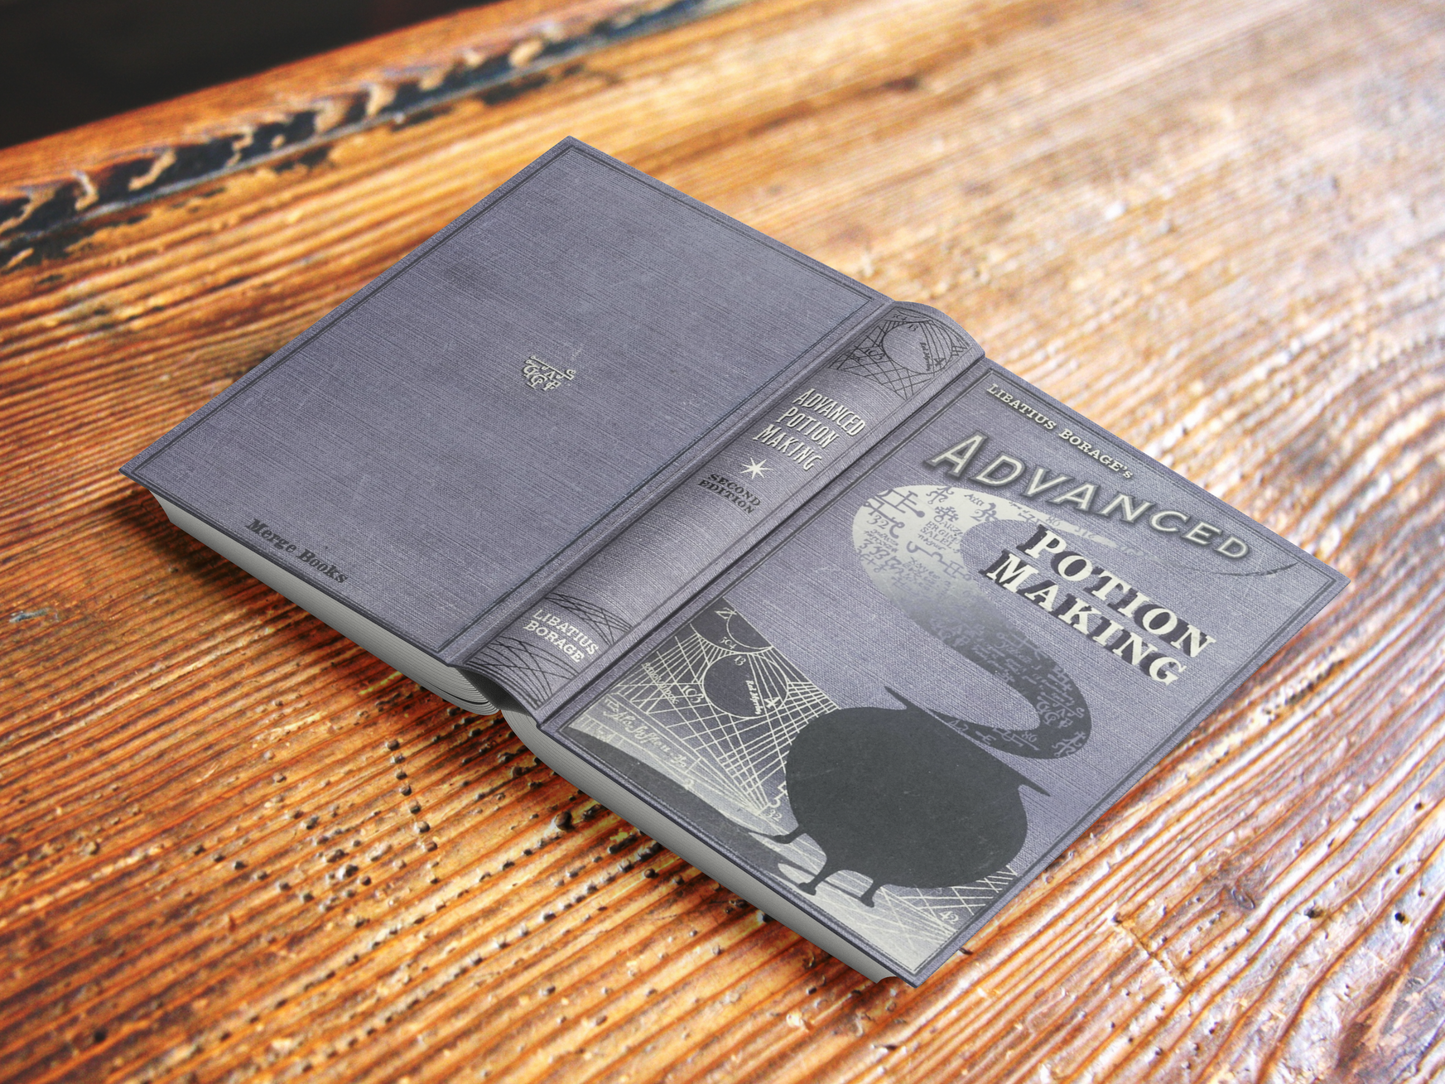 A5 size hardcover 'Advanced Potion Making' book positioned next to a ruler for scale